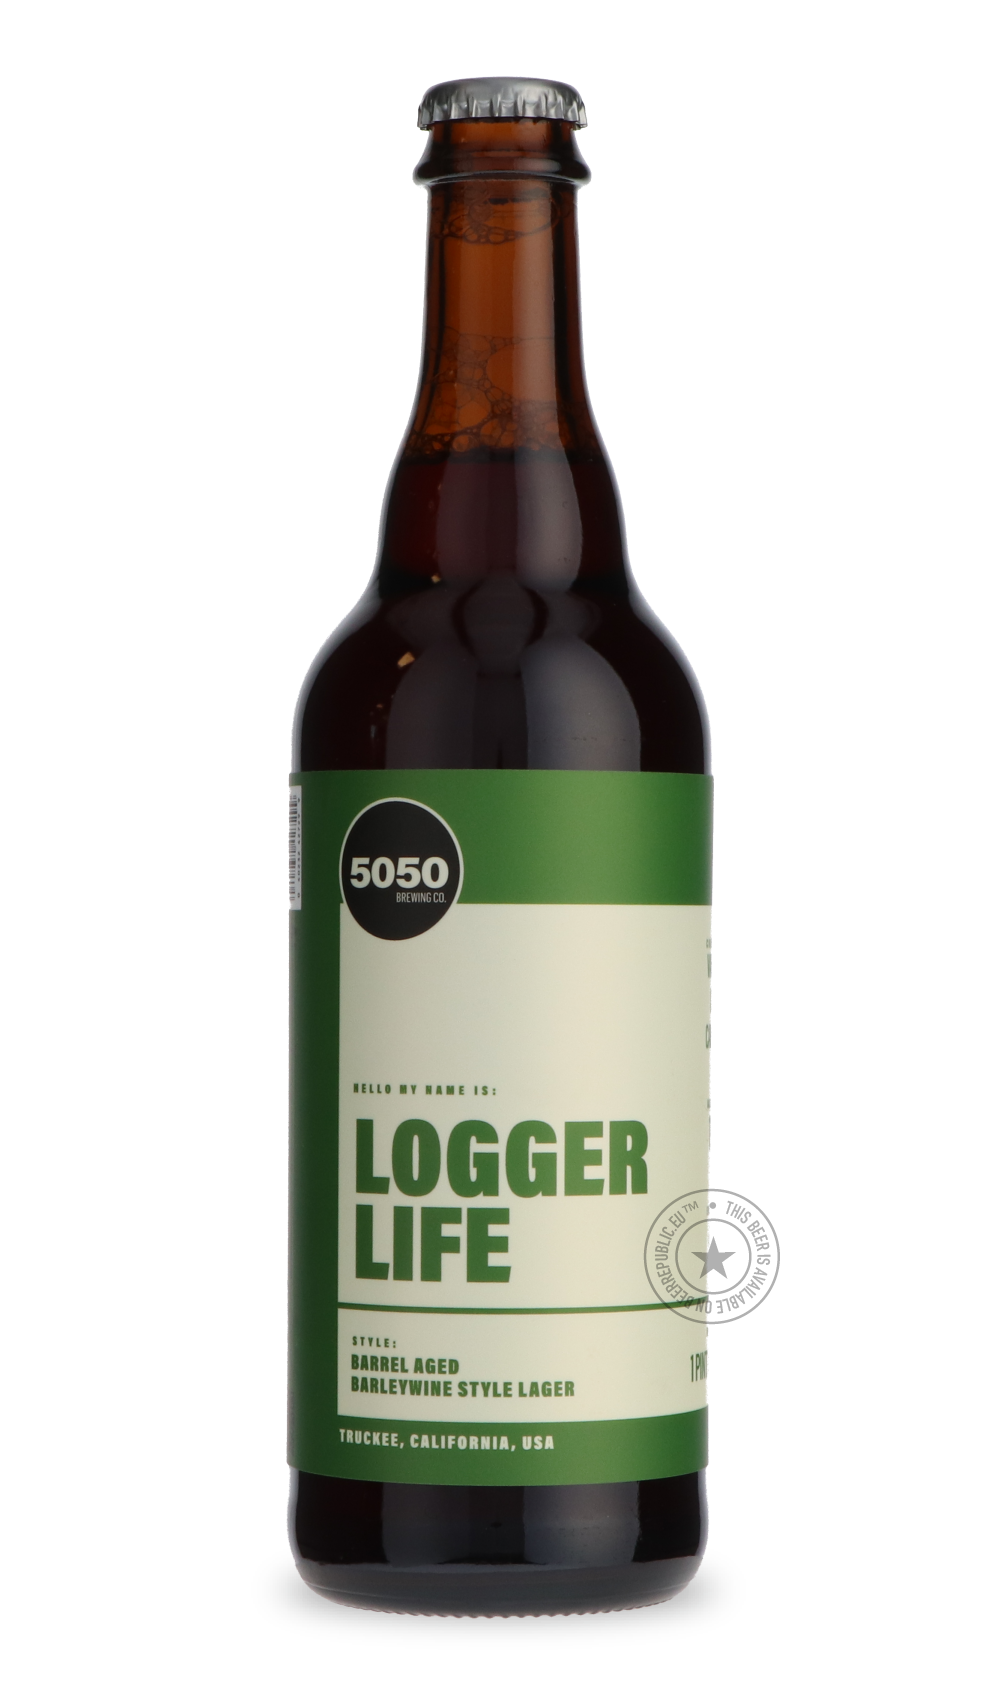 -FiftyFifty- Logger Life-Brown & Dark- Only @ Beer Republic - The best online beer store for American & Canadian craft beer - Buy beer online from the USA and Canada - Bier online kopen - Amerikaans bier kopen - Craft beer store - Craft beer kopen - Amerikanisch bier kaufen - Bier online kaufen - Acheter biere online - IPA - Stout - Porter - New England IPA - Hazy IPA - Imperial Stout - Barrel Aged - Barrel Aged Imperial Stout - Brown - Dark beer - Blond - Blonde - Pilsner - Lager - Wheat - Weizen - Amber -